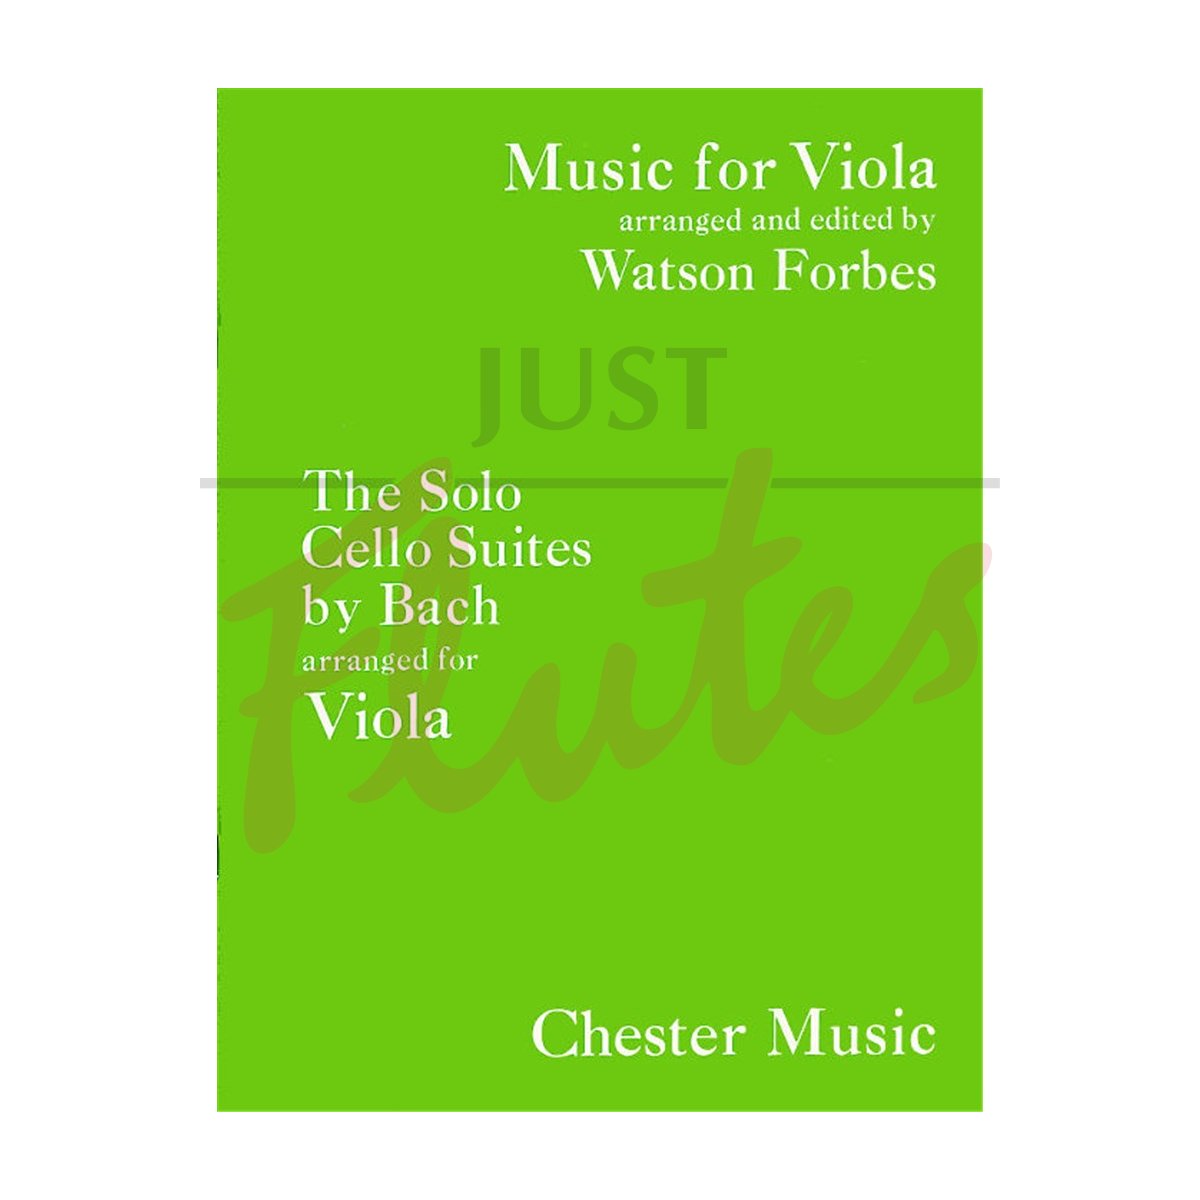 The Solo Cello Suites by Bach arranged for Viola